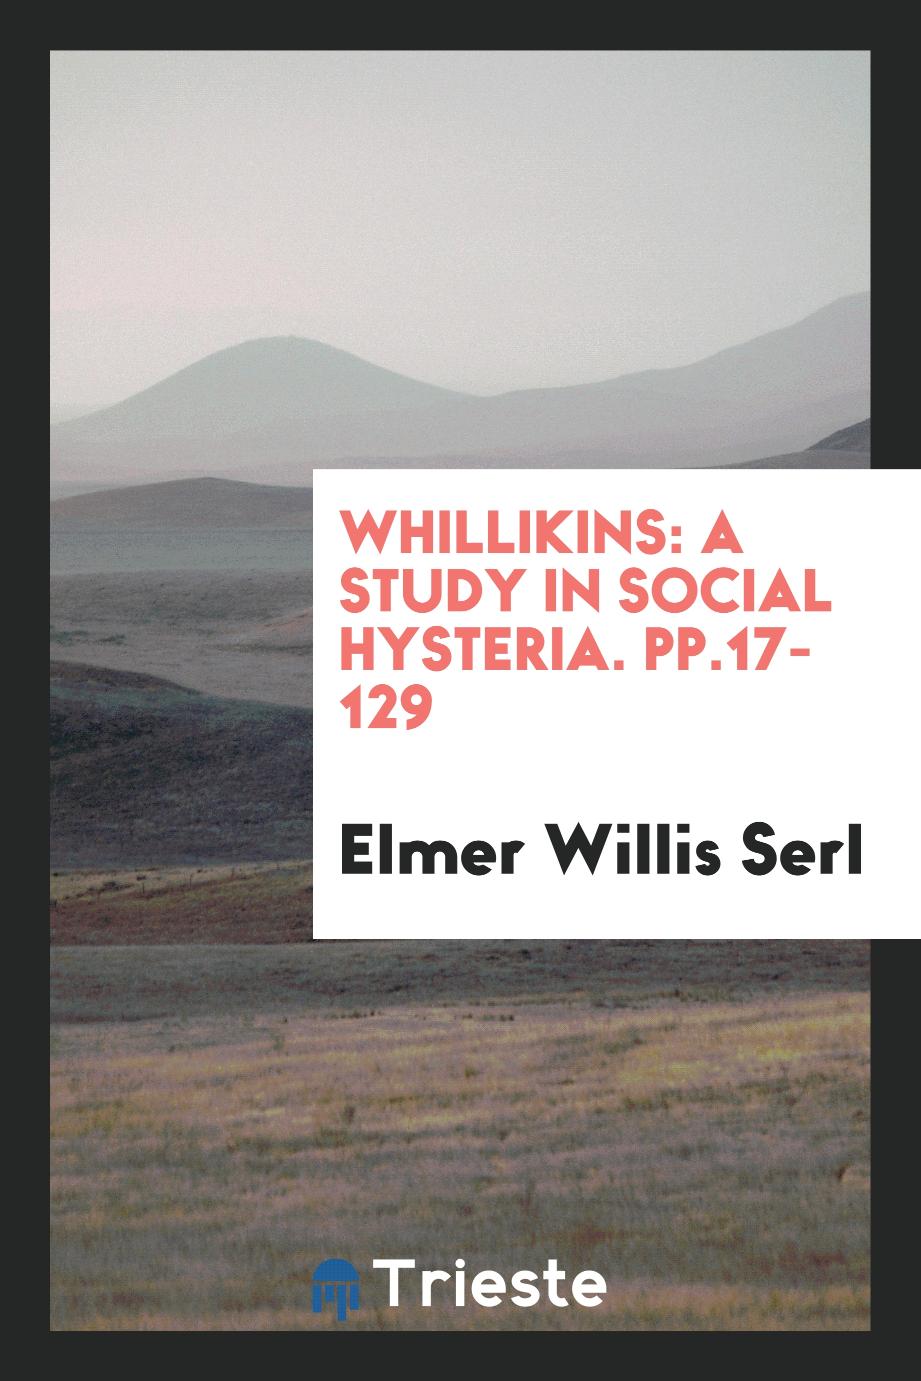 Whillikins: A Study in Social Hysteria. pp.17-129